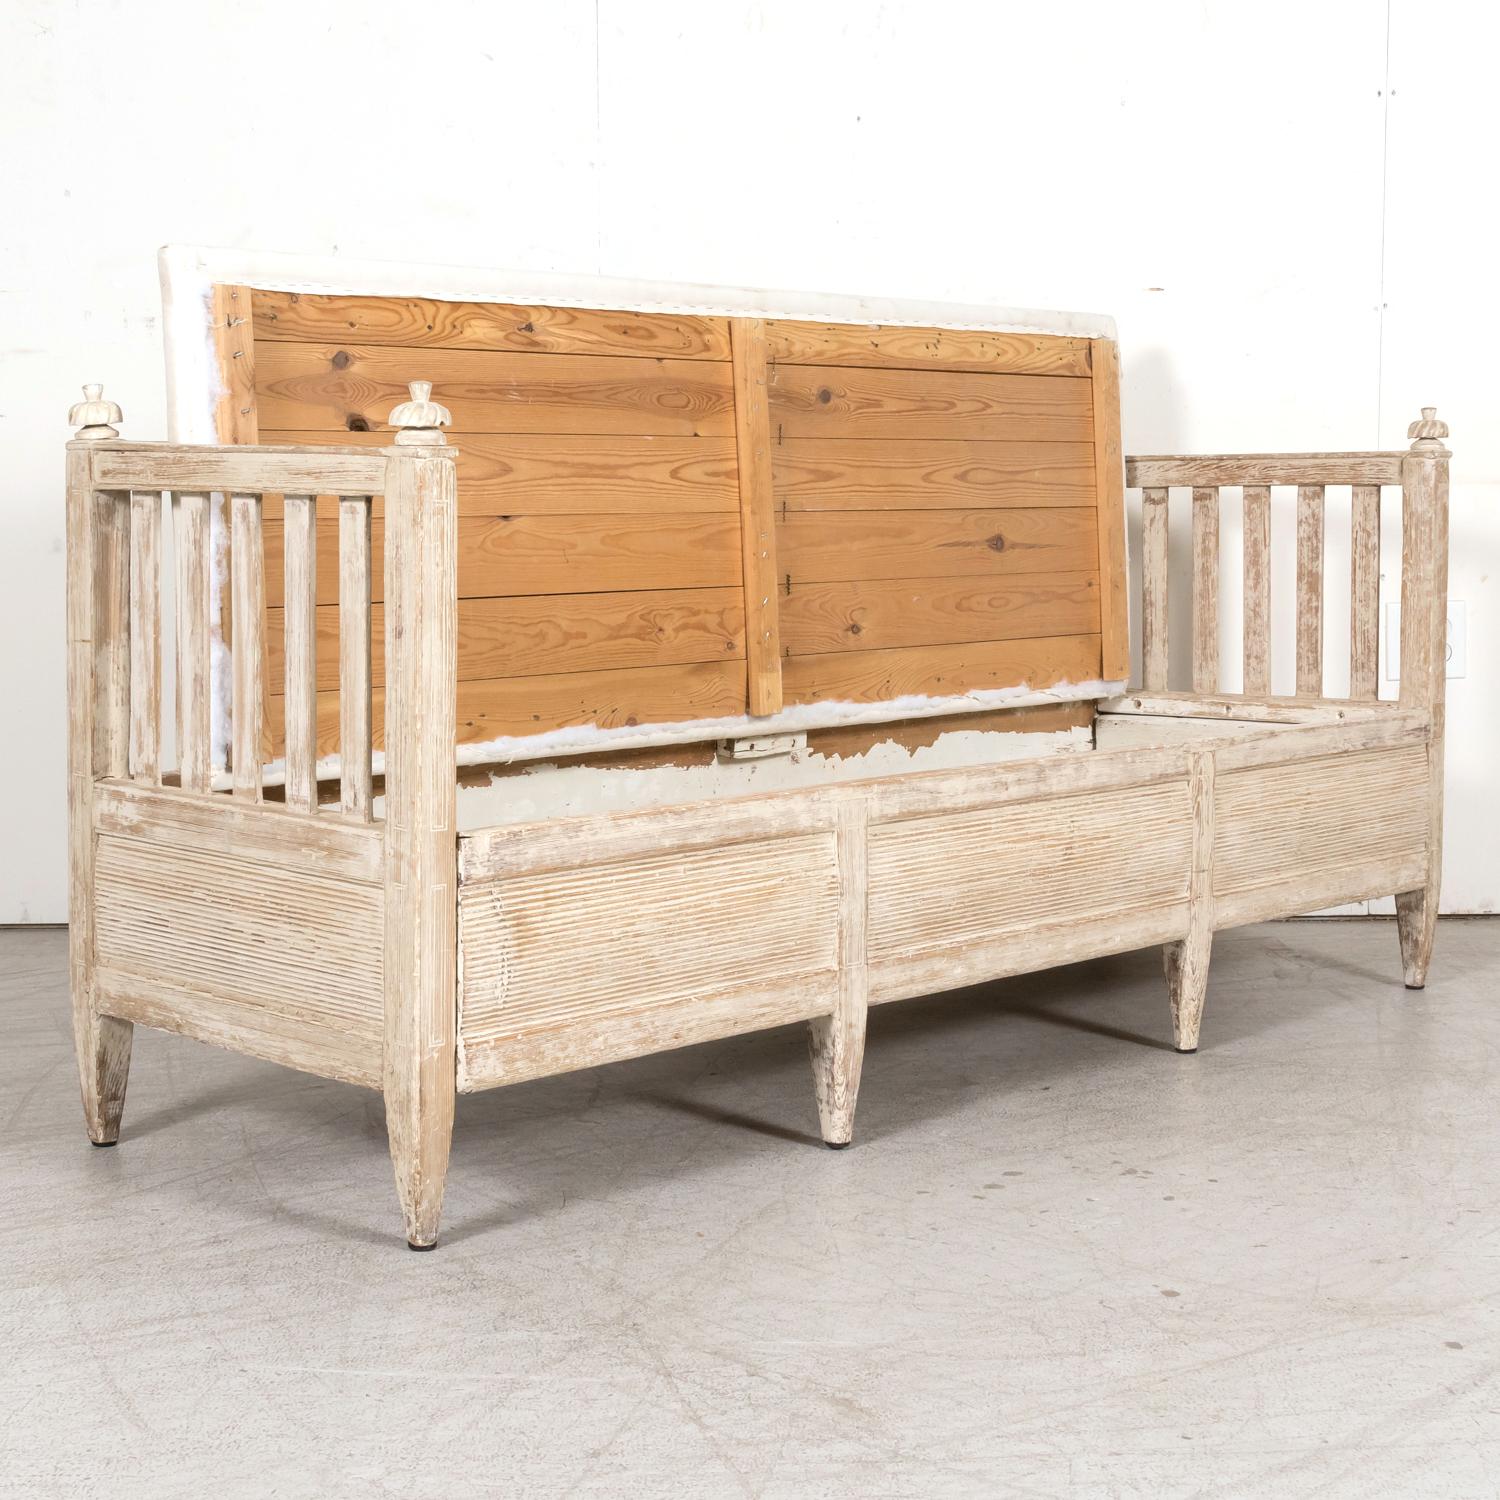 19th Century Swedish Gustavian Style Painted Stickback Sofa Bench with Lift Seat For Sale 7